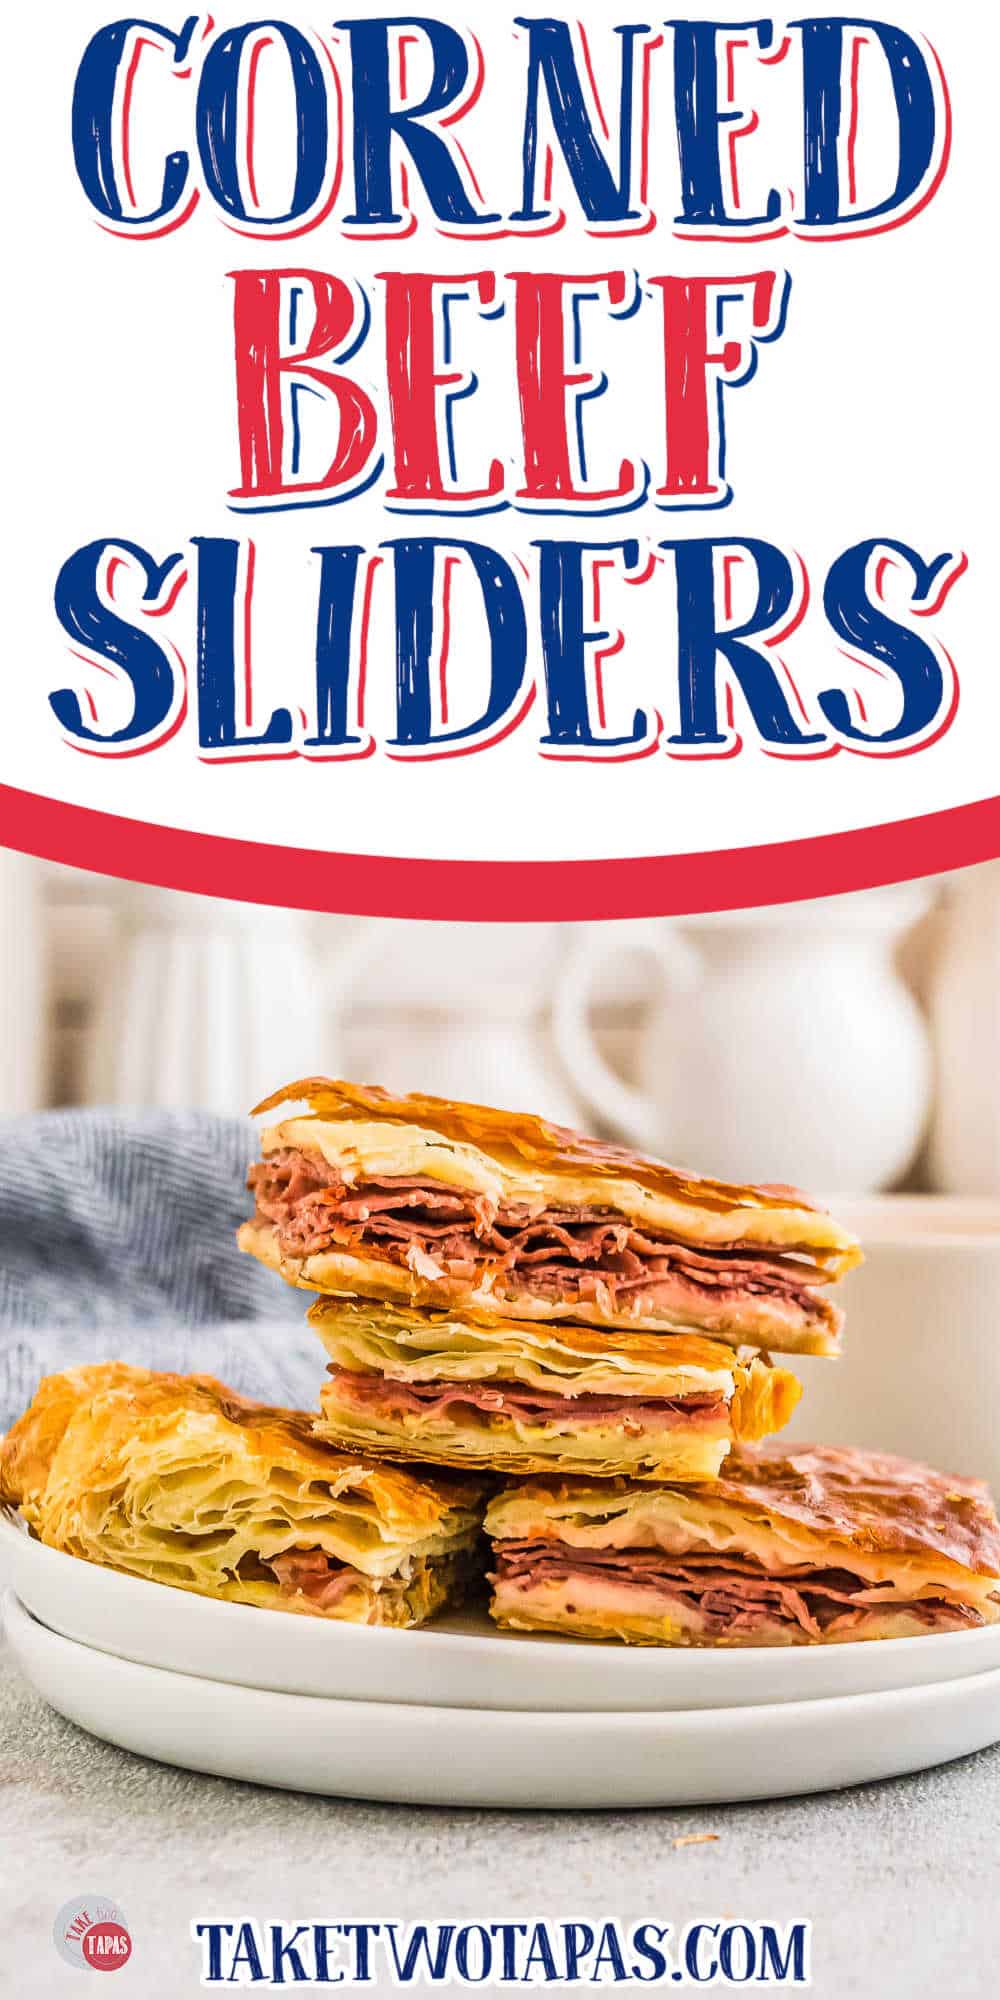 stack of sliders on cutting board with text "corned beef sliders"